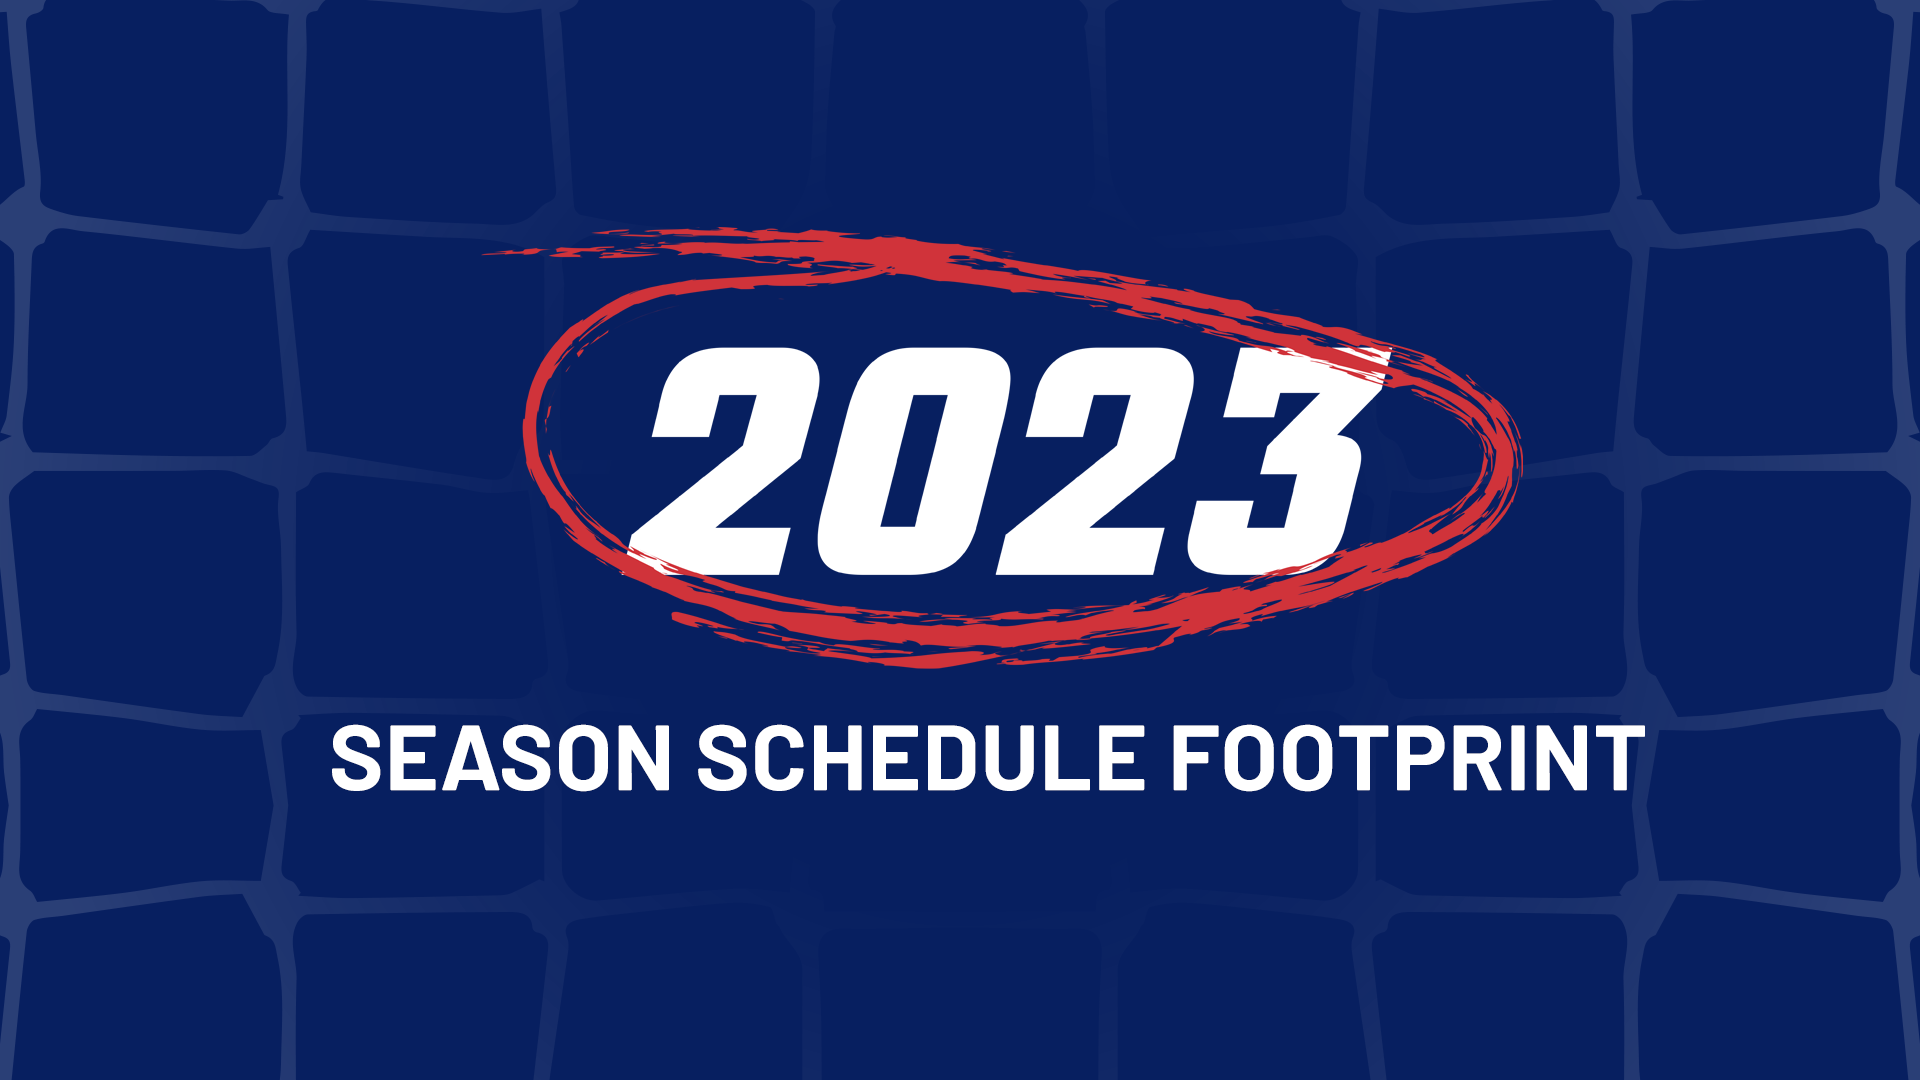 NWSL Announces 2023 Season Schedule Footprint Featured Image